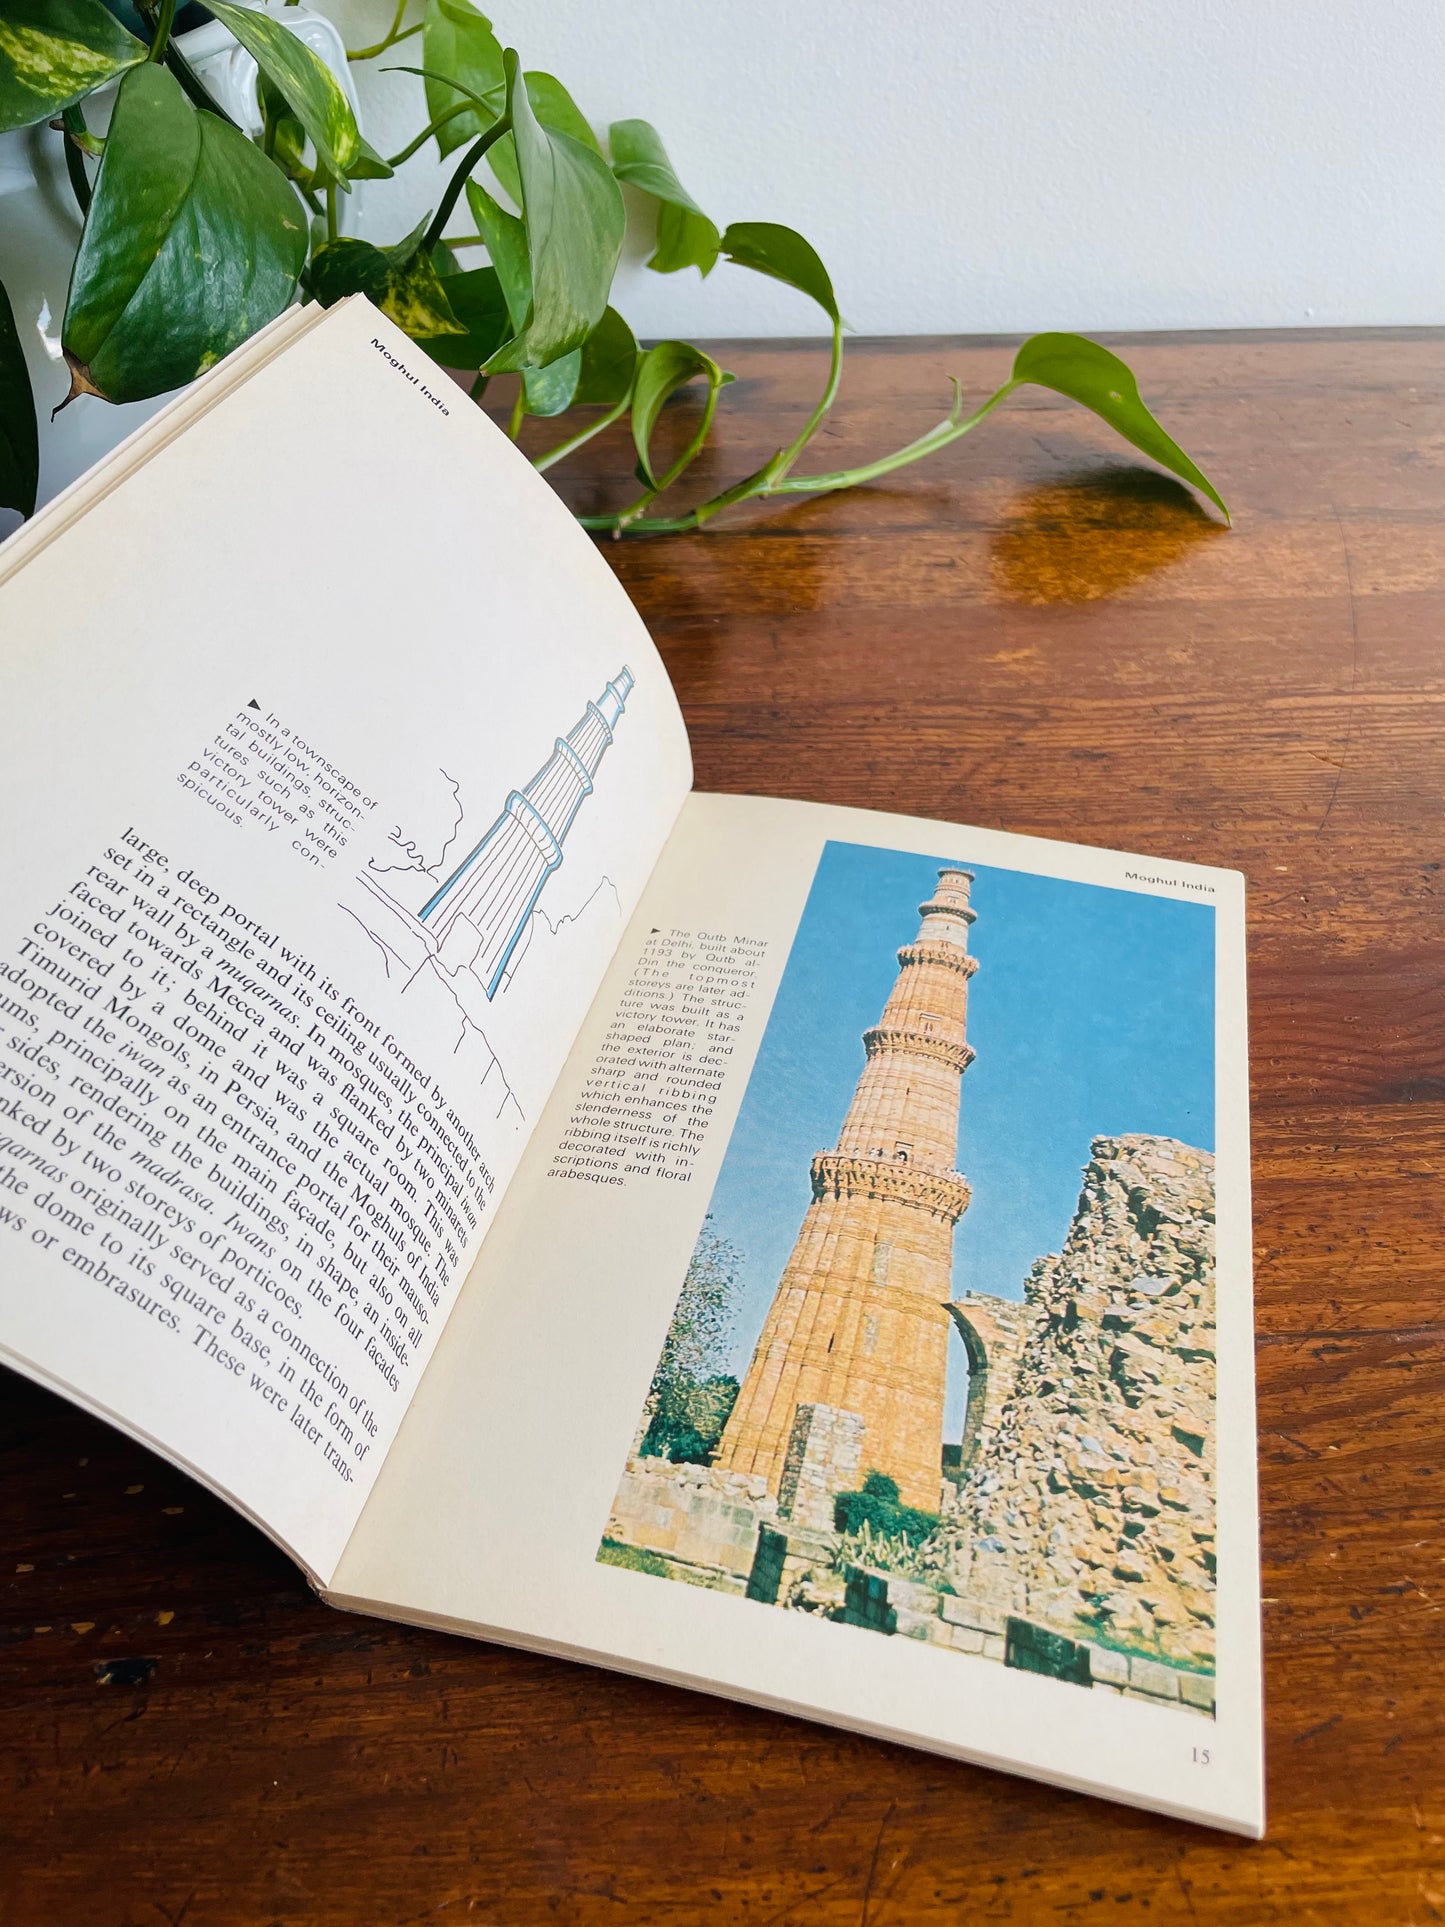 How to Recognize Islamic Art - Pocket Book (1978)